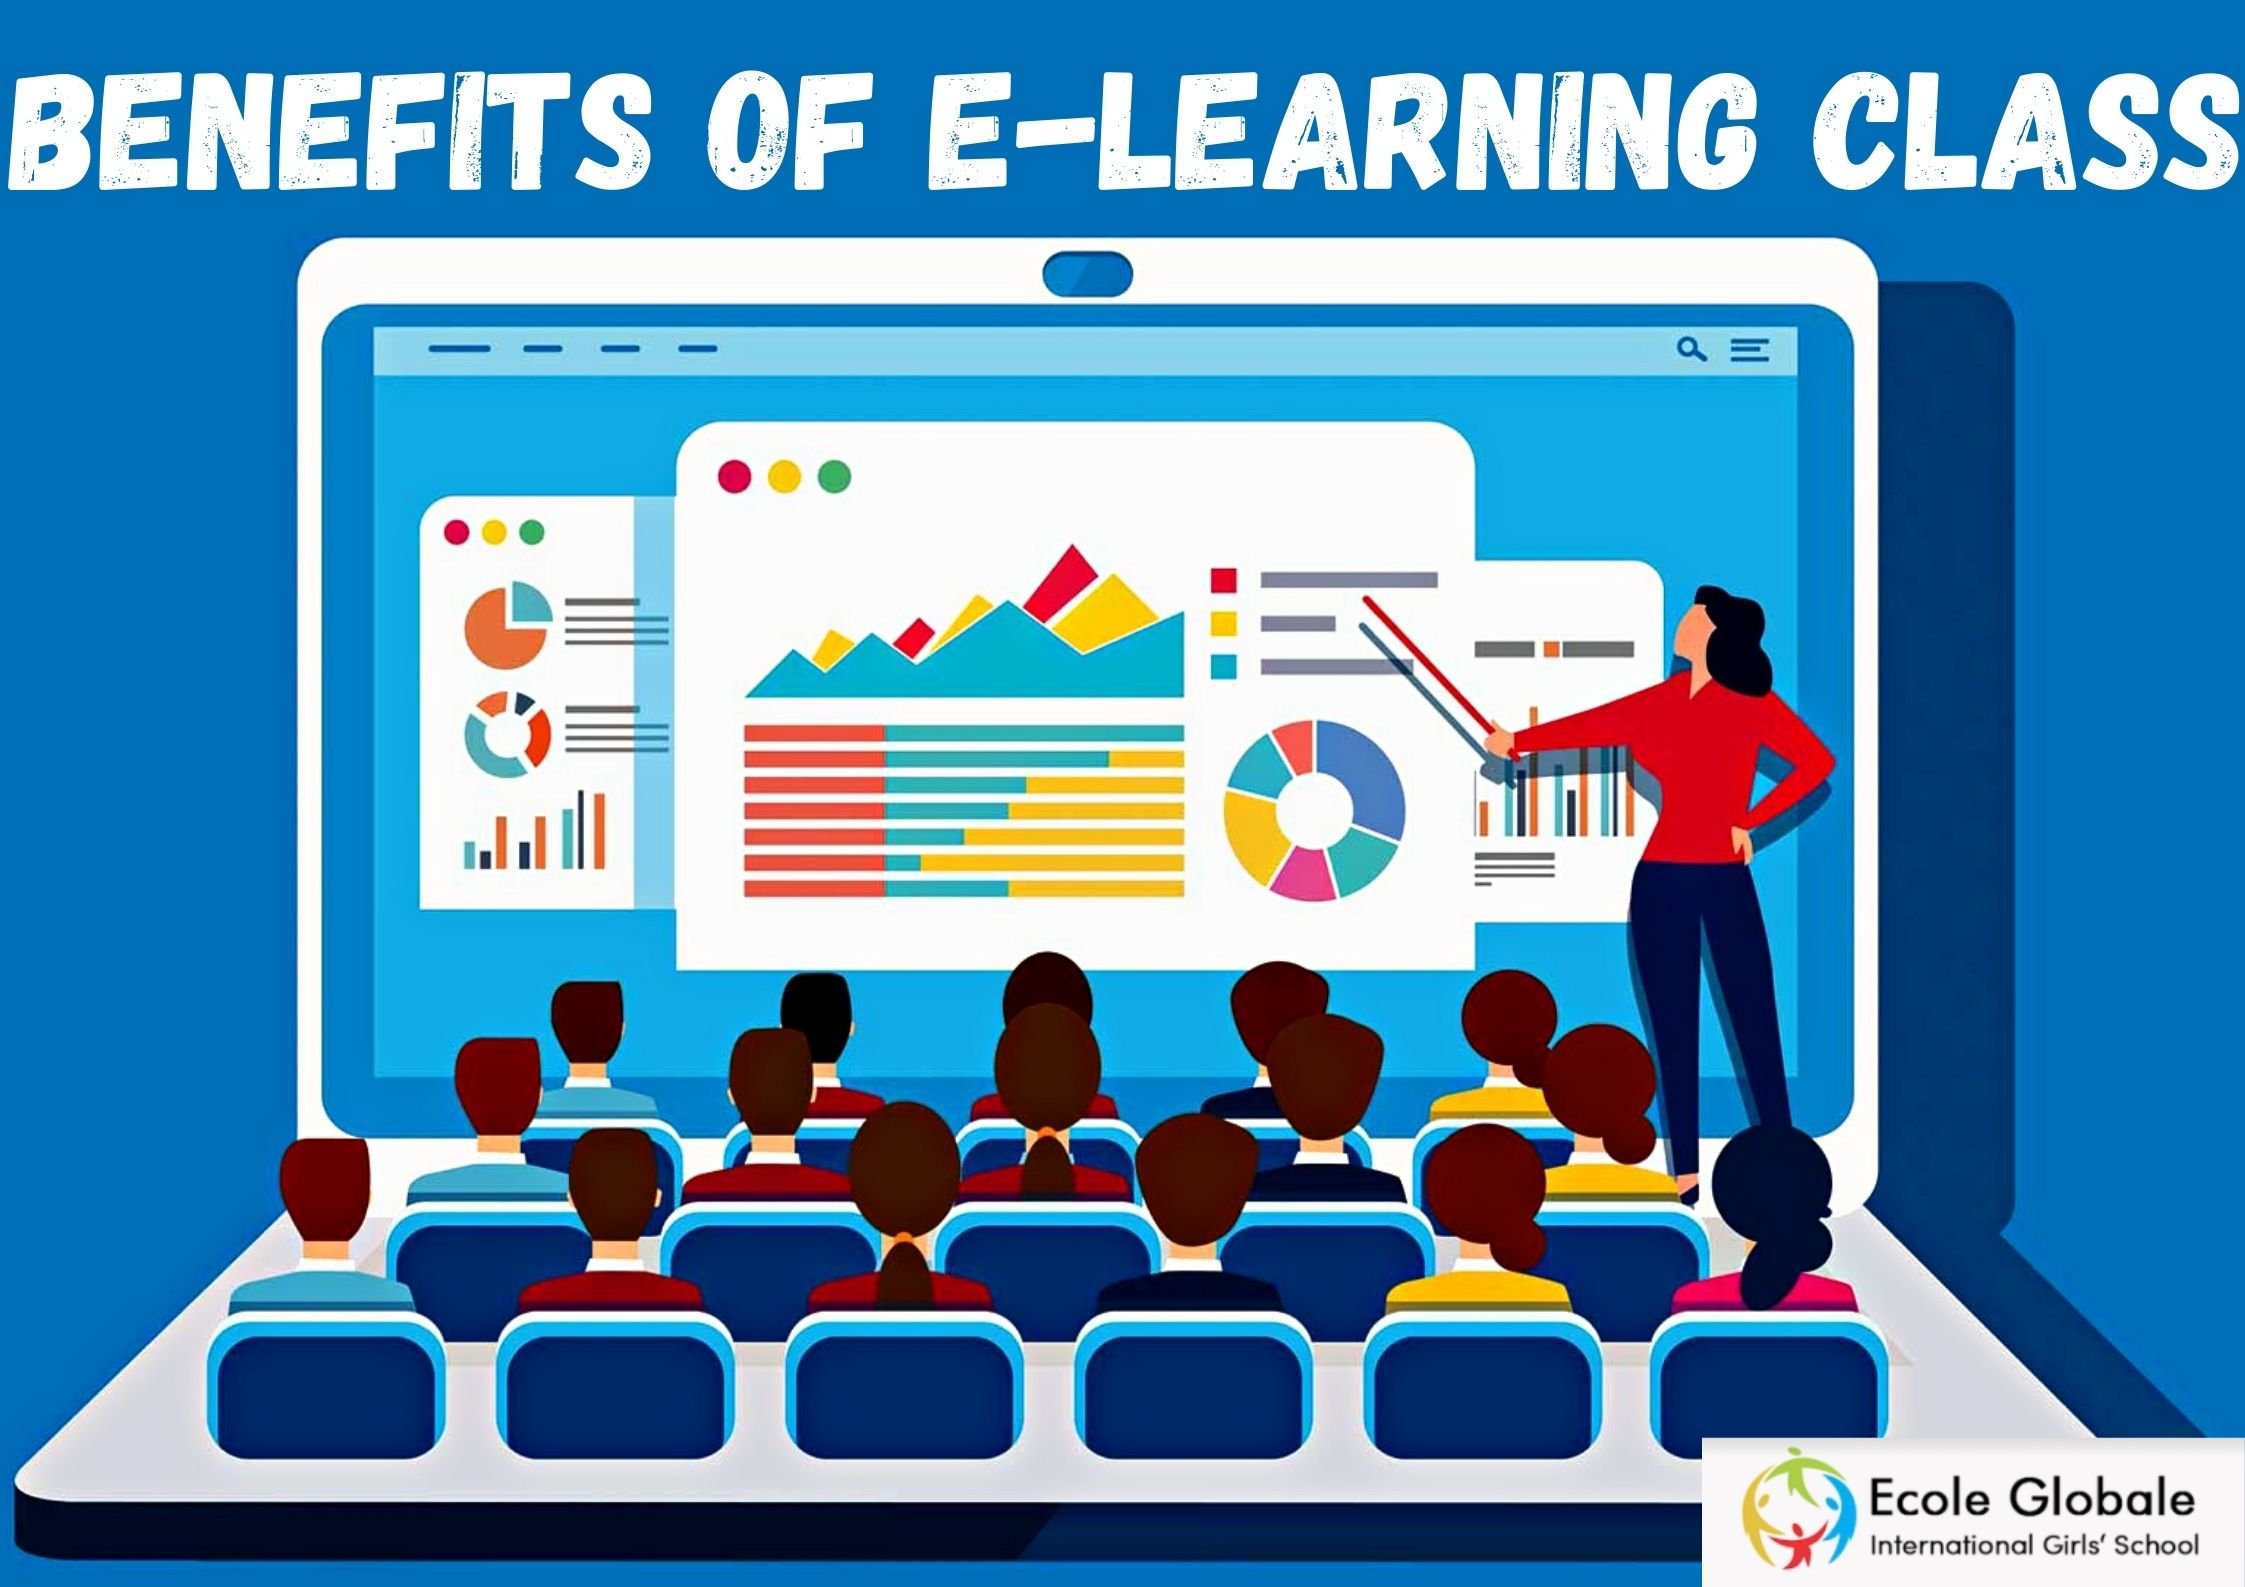 HOW HAS ONLINE LEARNING BENEFITED TO THE INSTITUTIONS